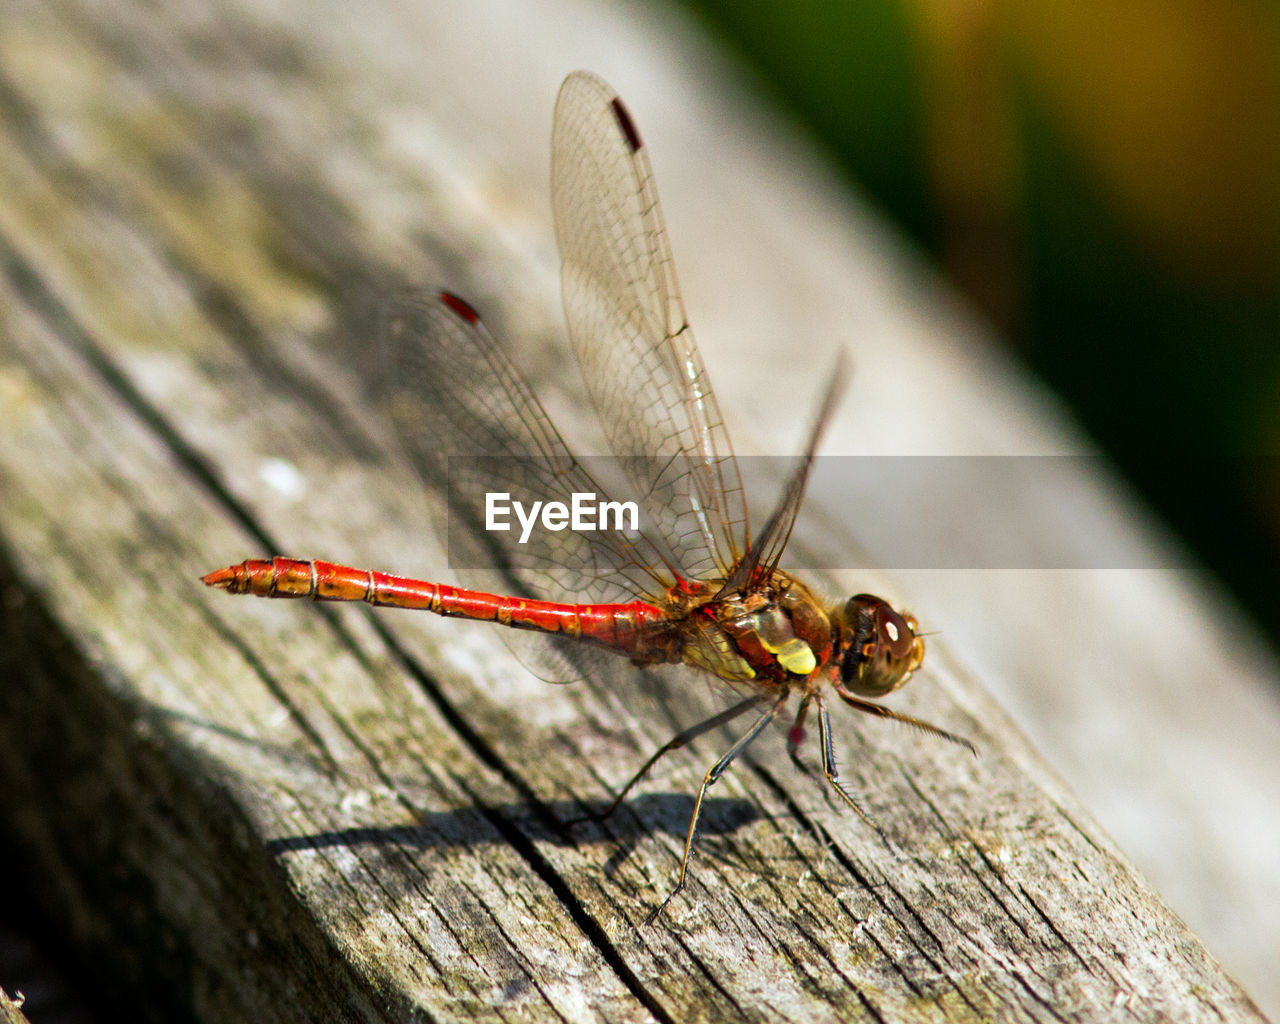 DRAGONFLY ON WOODEN PLANK